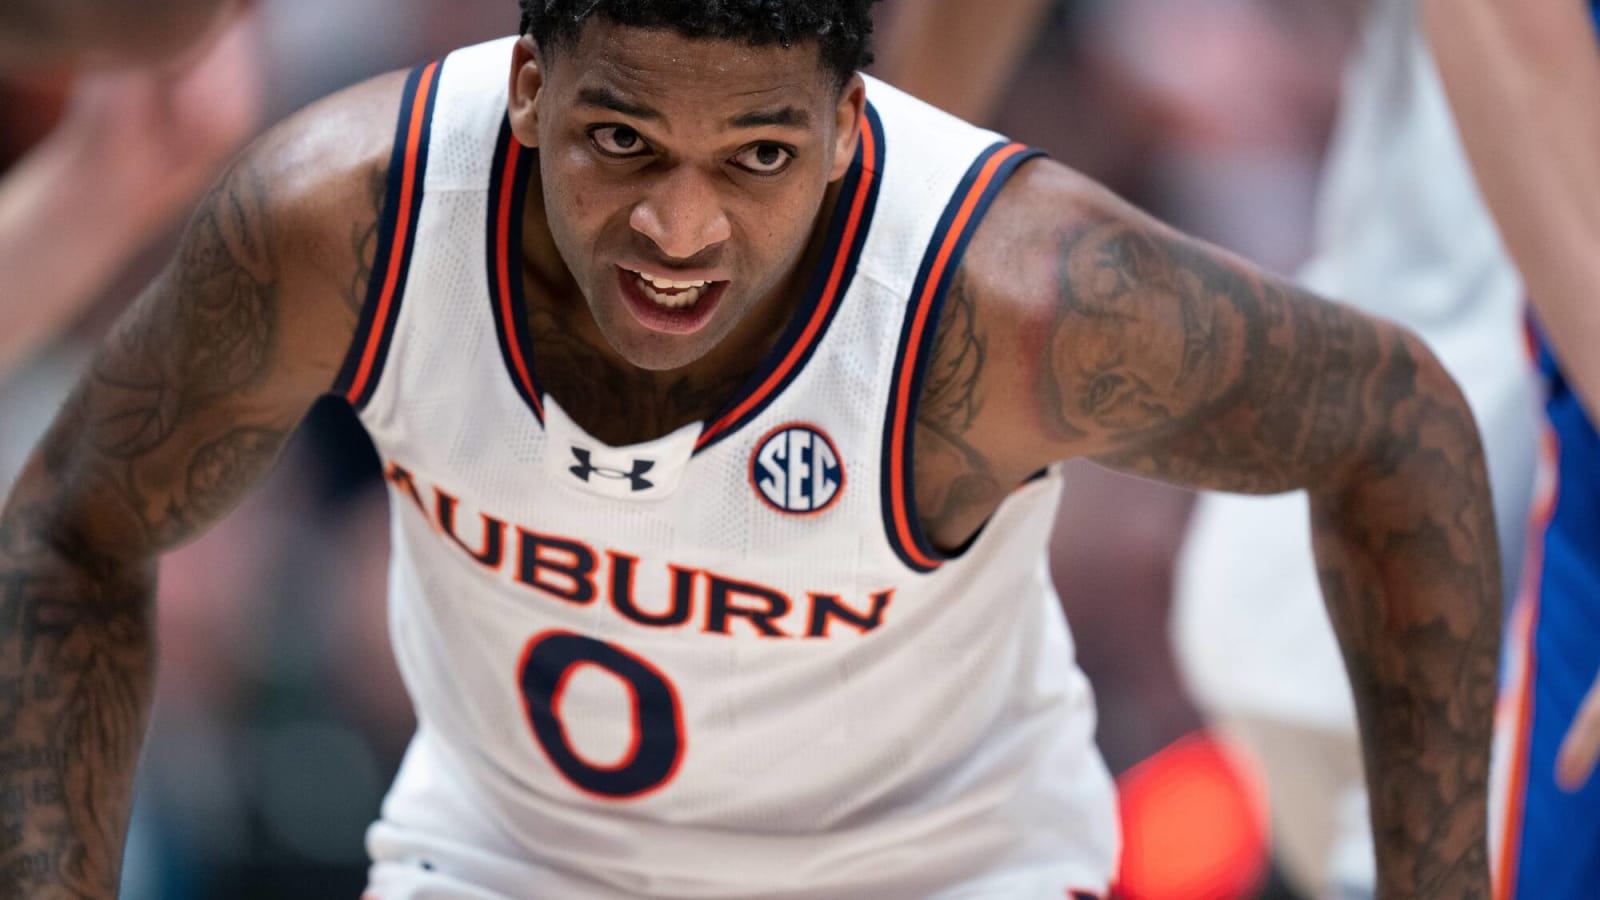 How to Watch Auburn vs. Yale March Madness Round 1